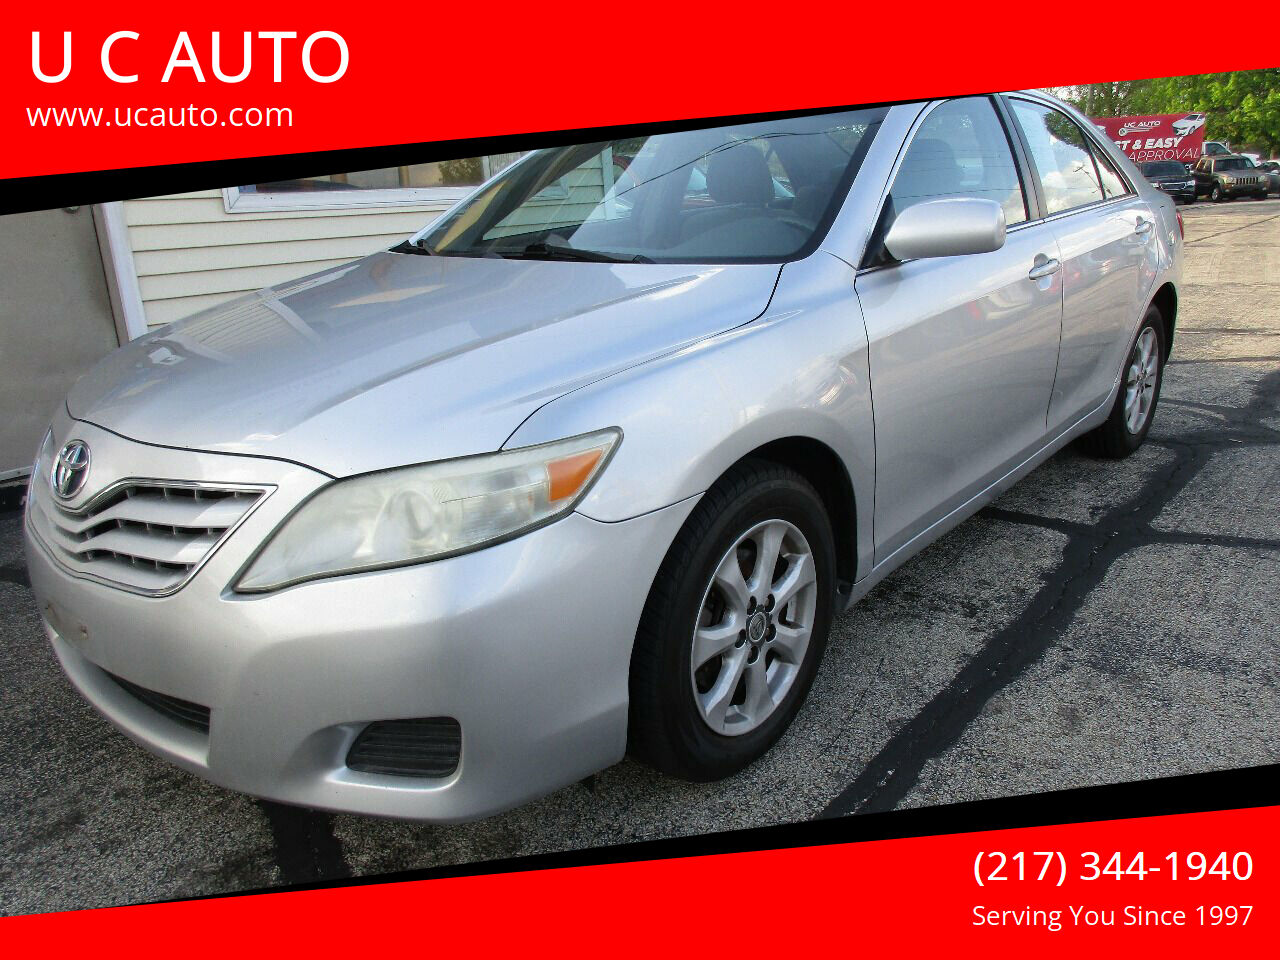 Toyota Camry 2008 - Family Auto of Anderson